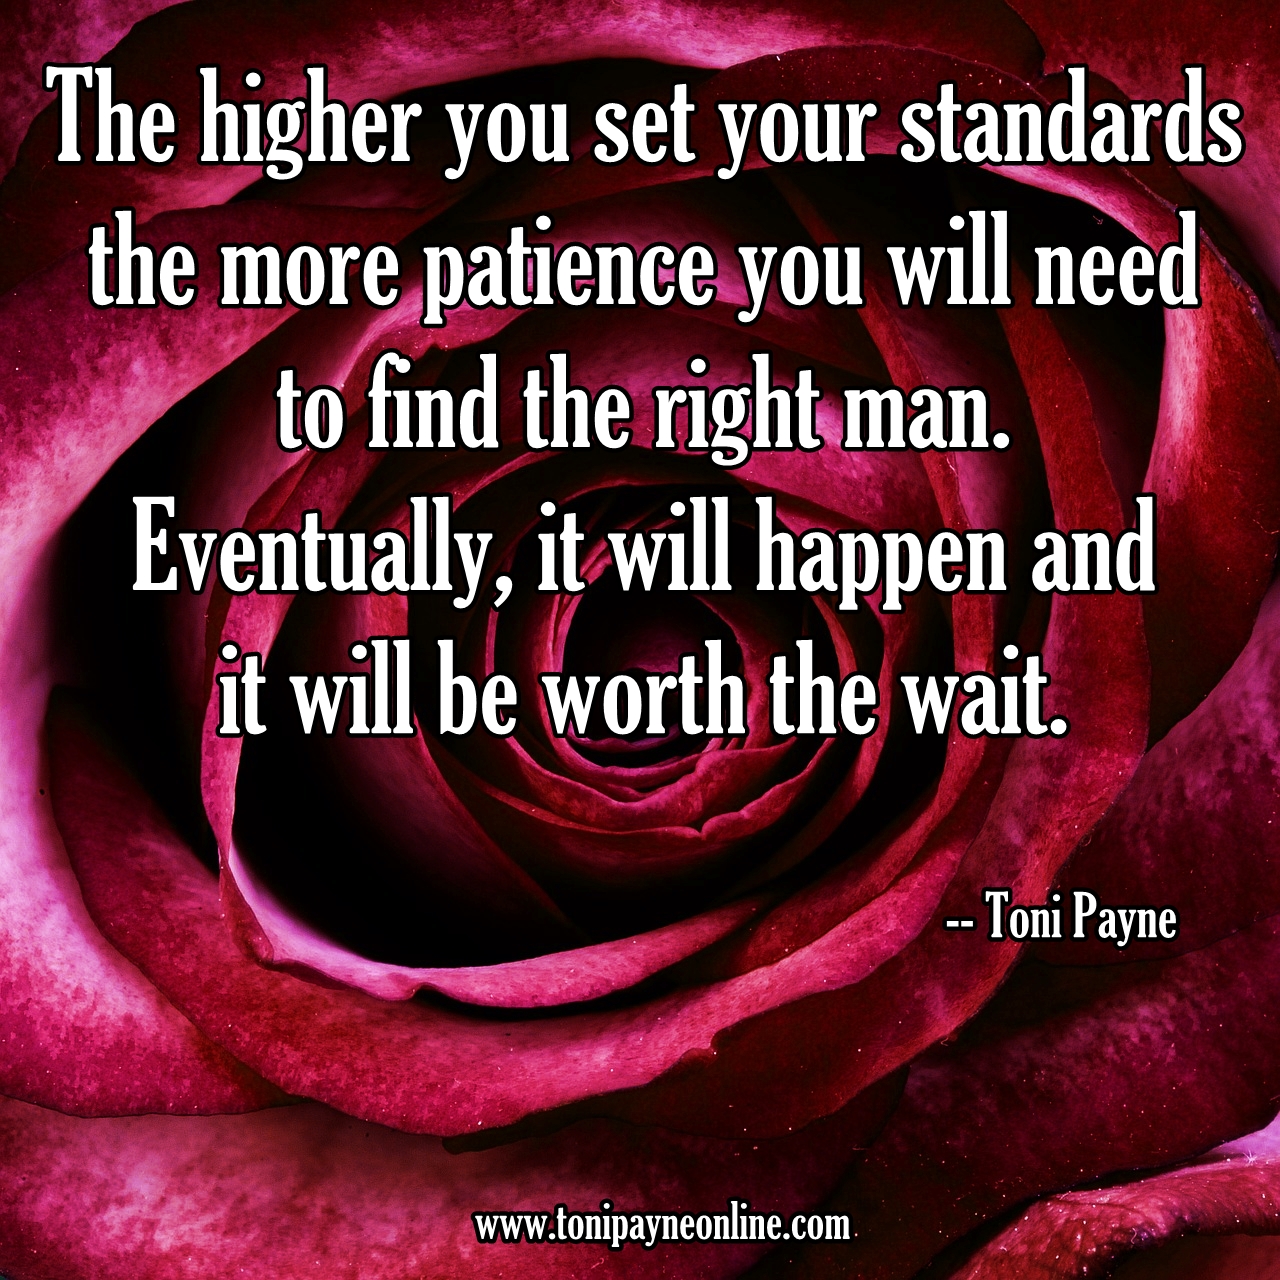 Quote about Having Patience when finding a significant other